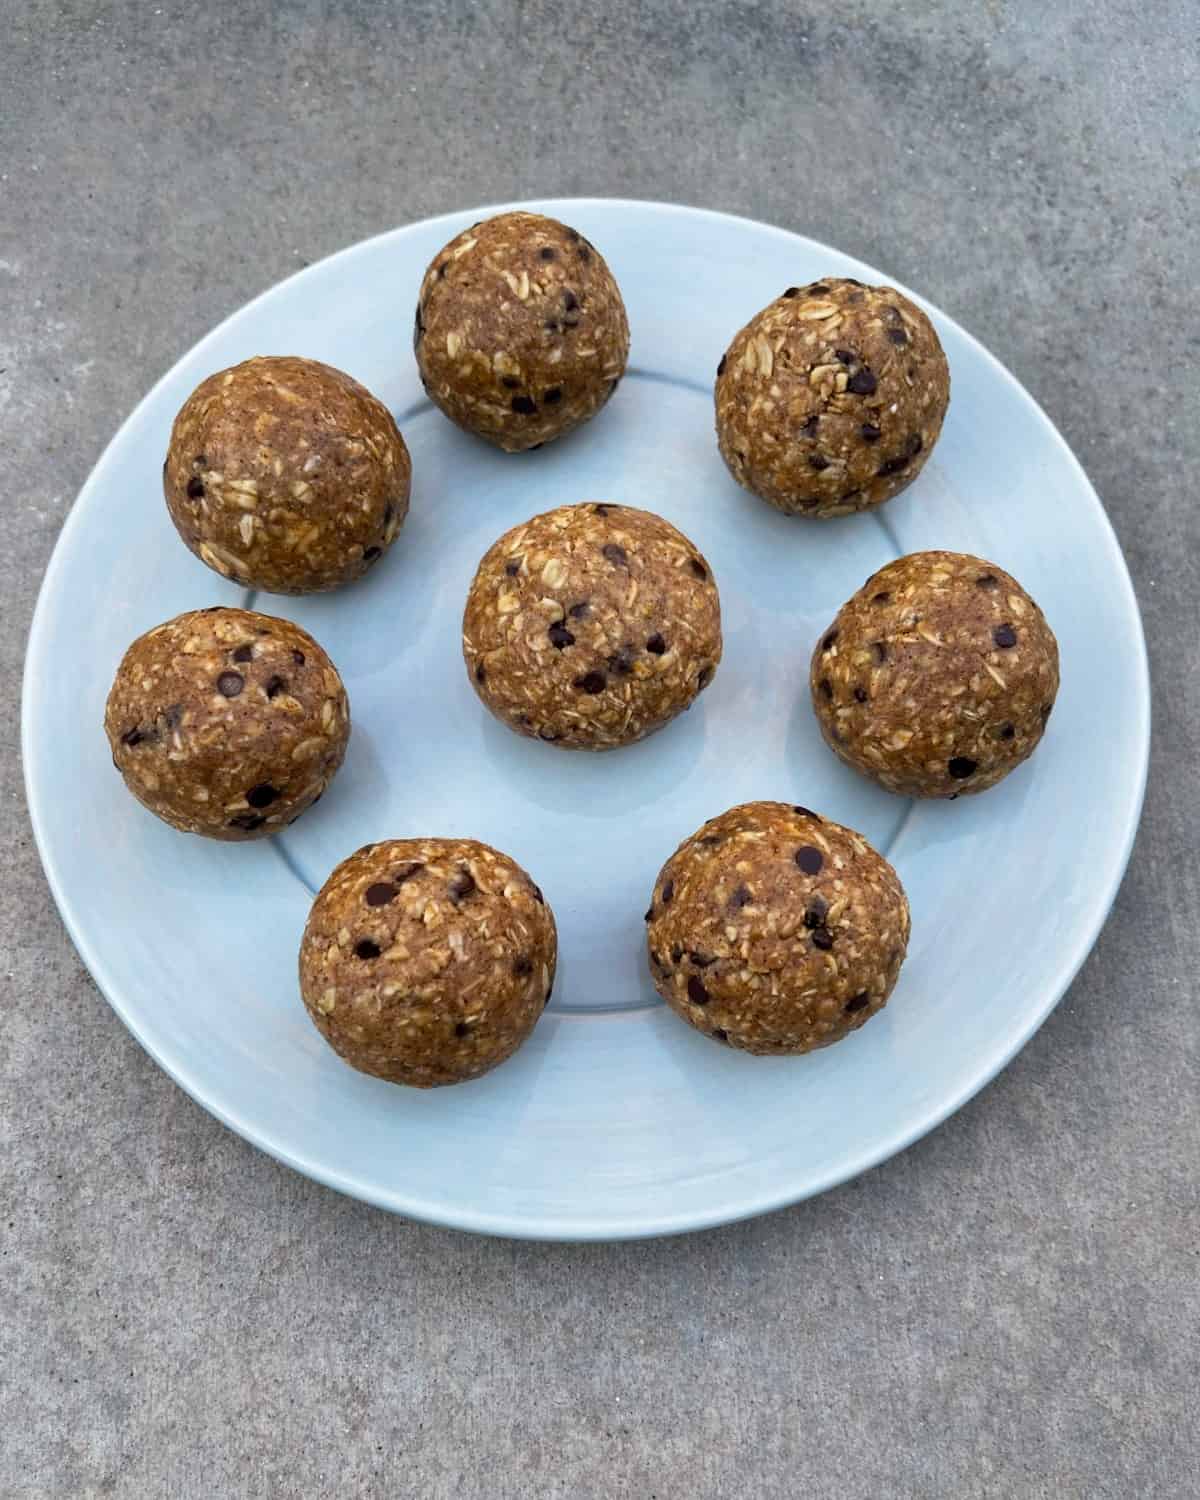 Kodiak no-bake oatmeal chocolate chip protein balls in blue plate from above.